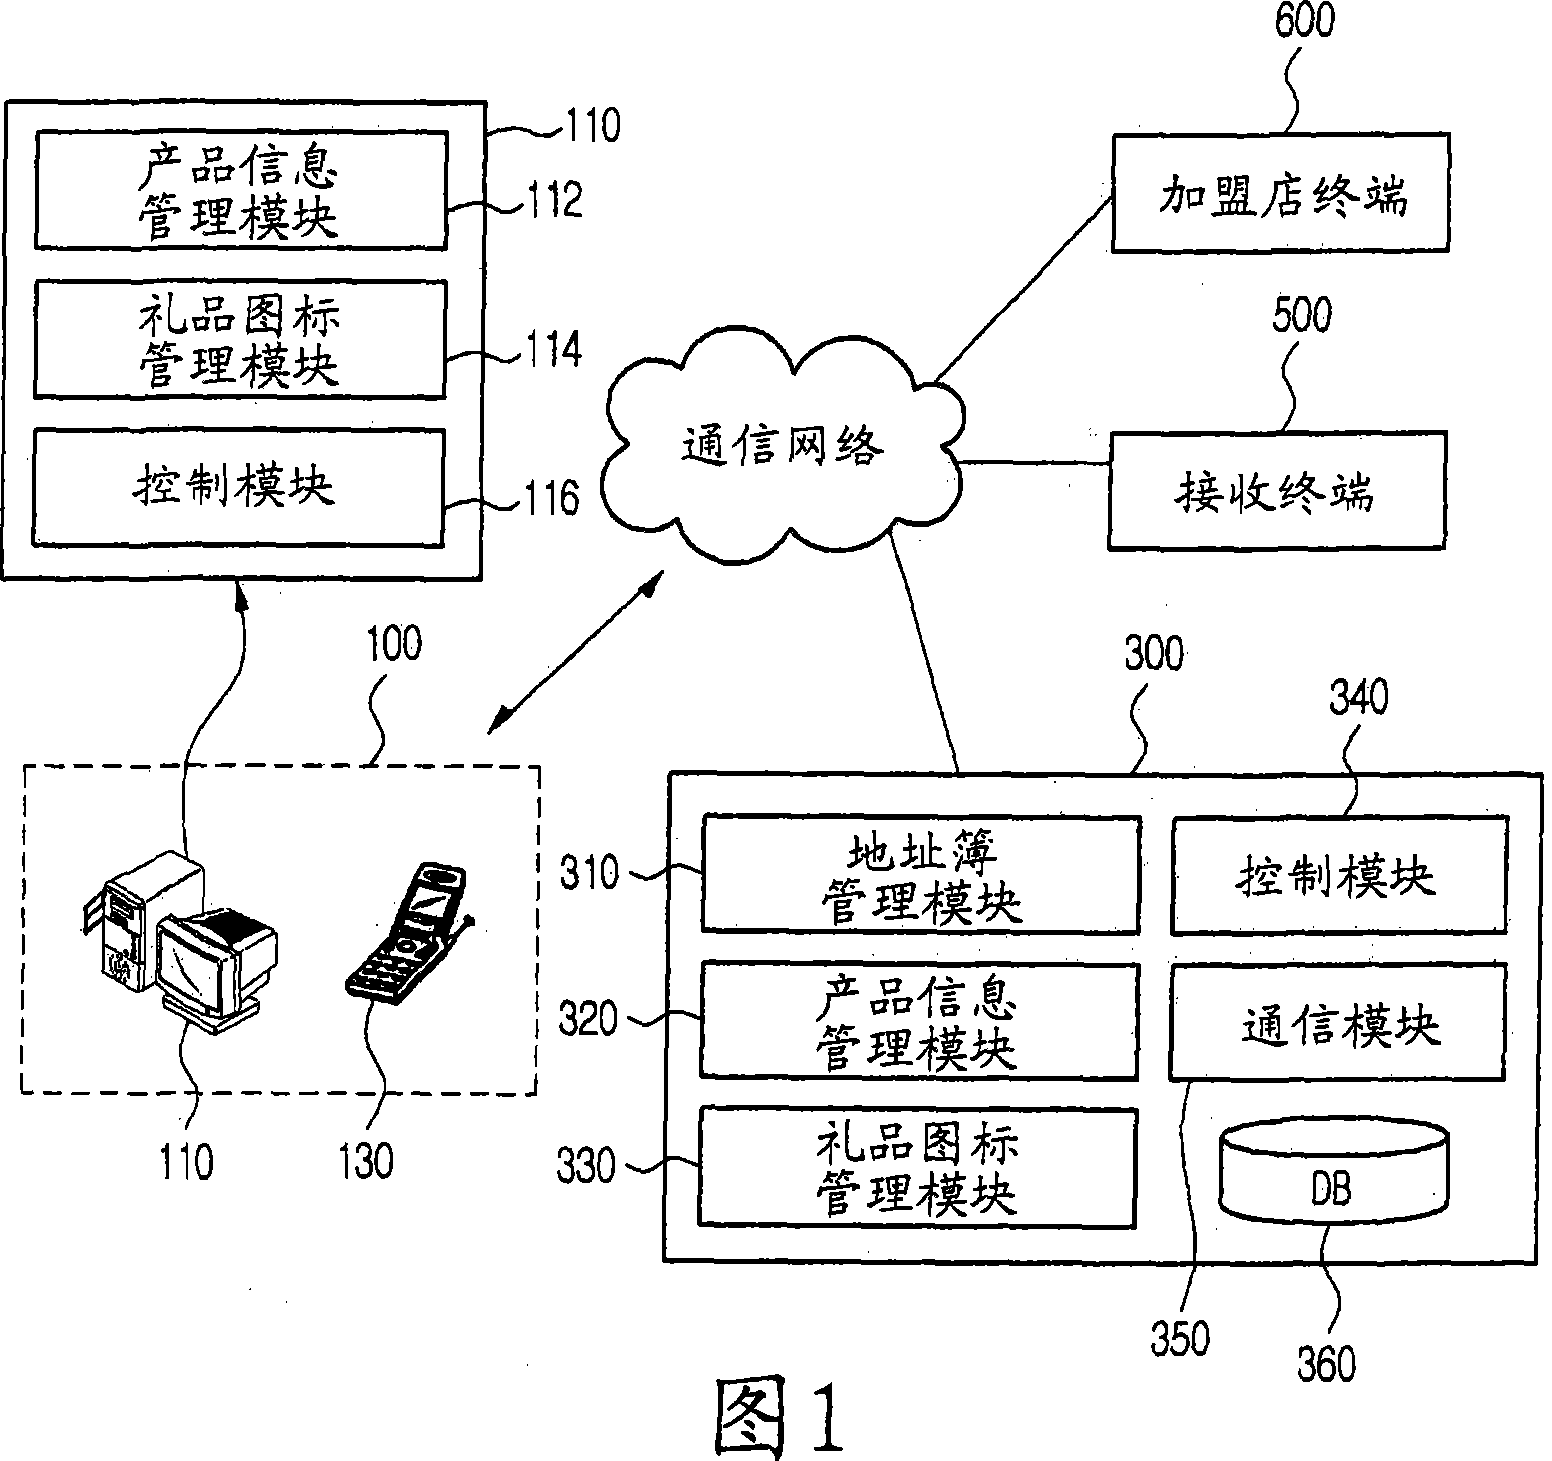 Method and apparatus for providing gift by using communication network and system including the apparatus